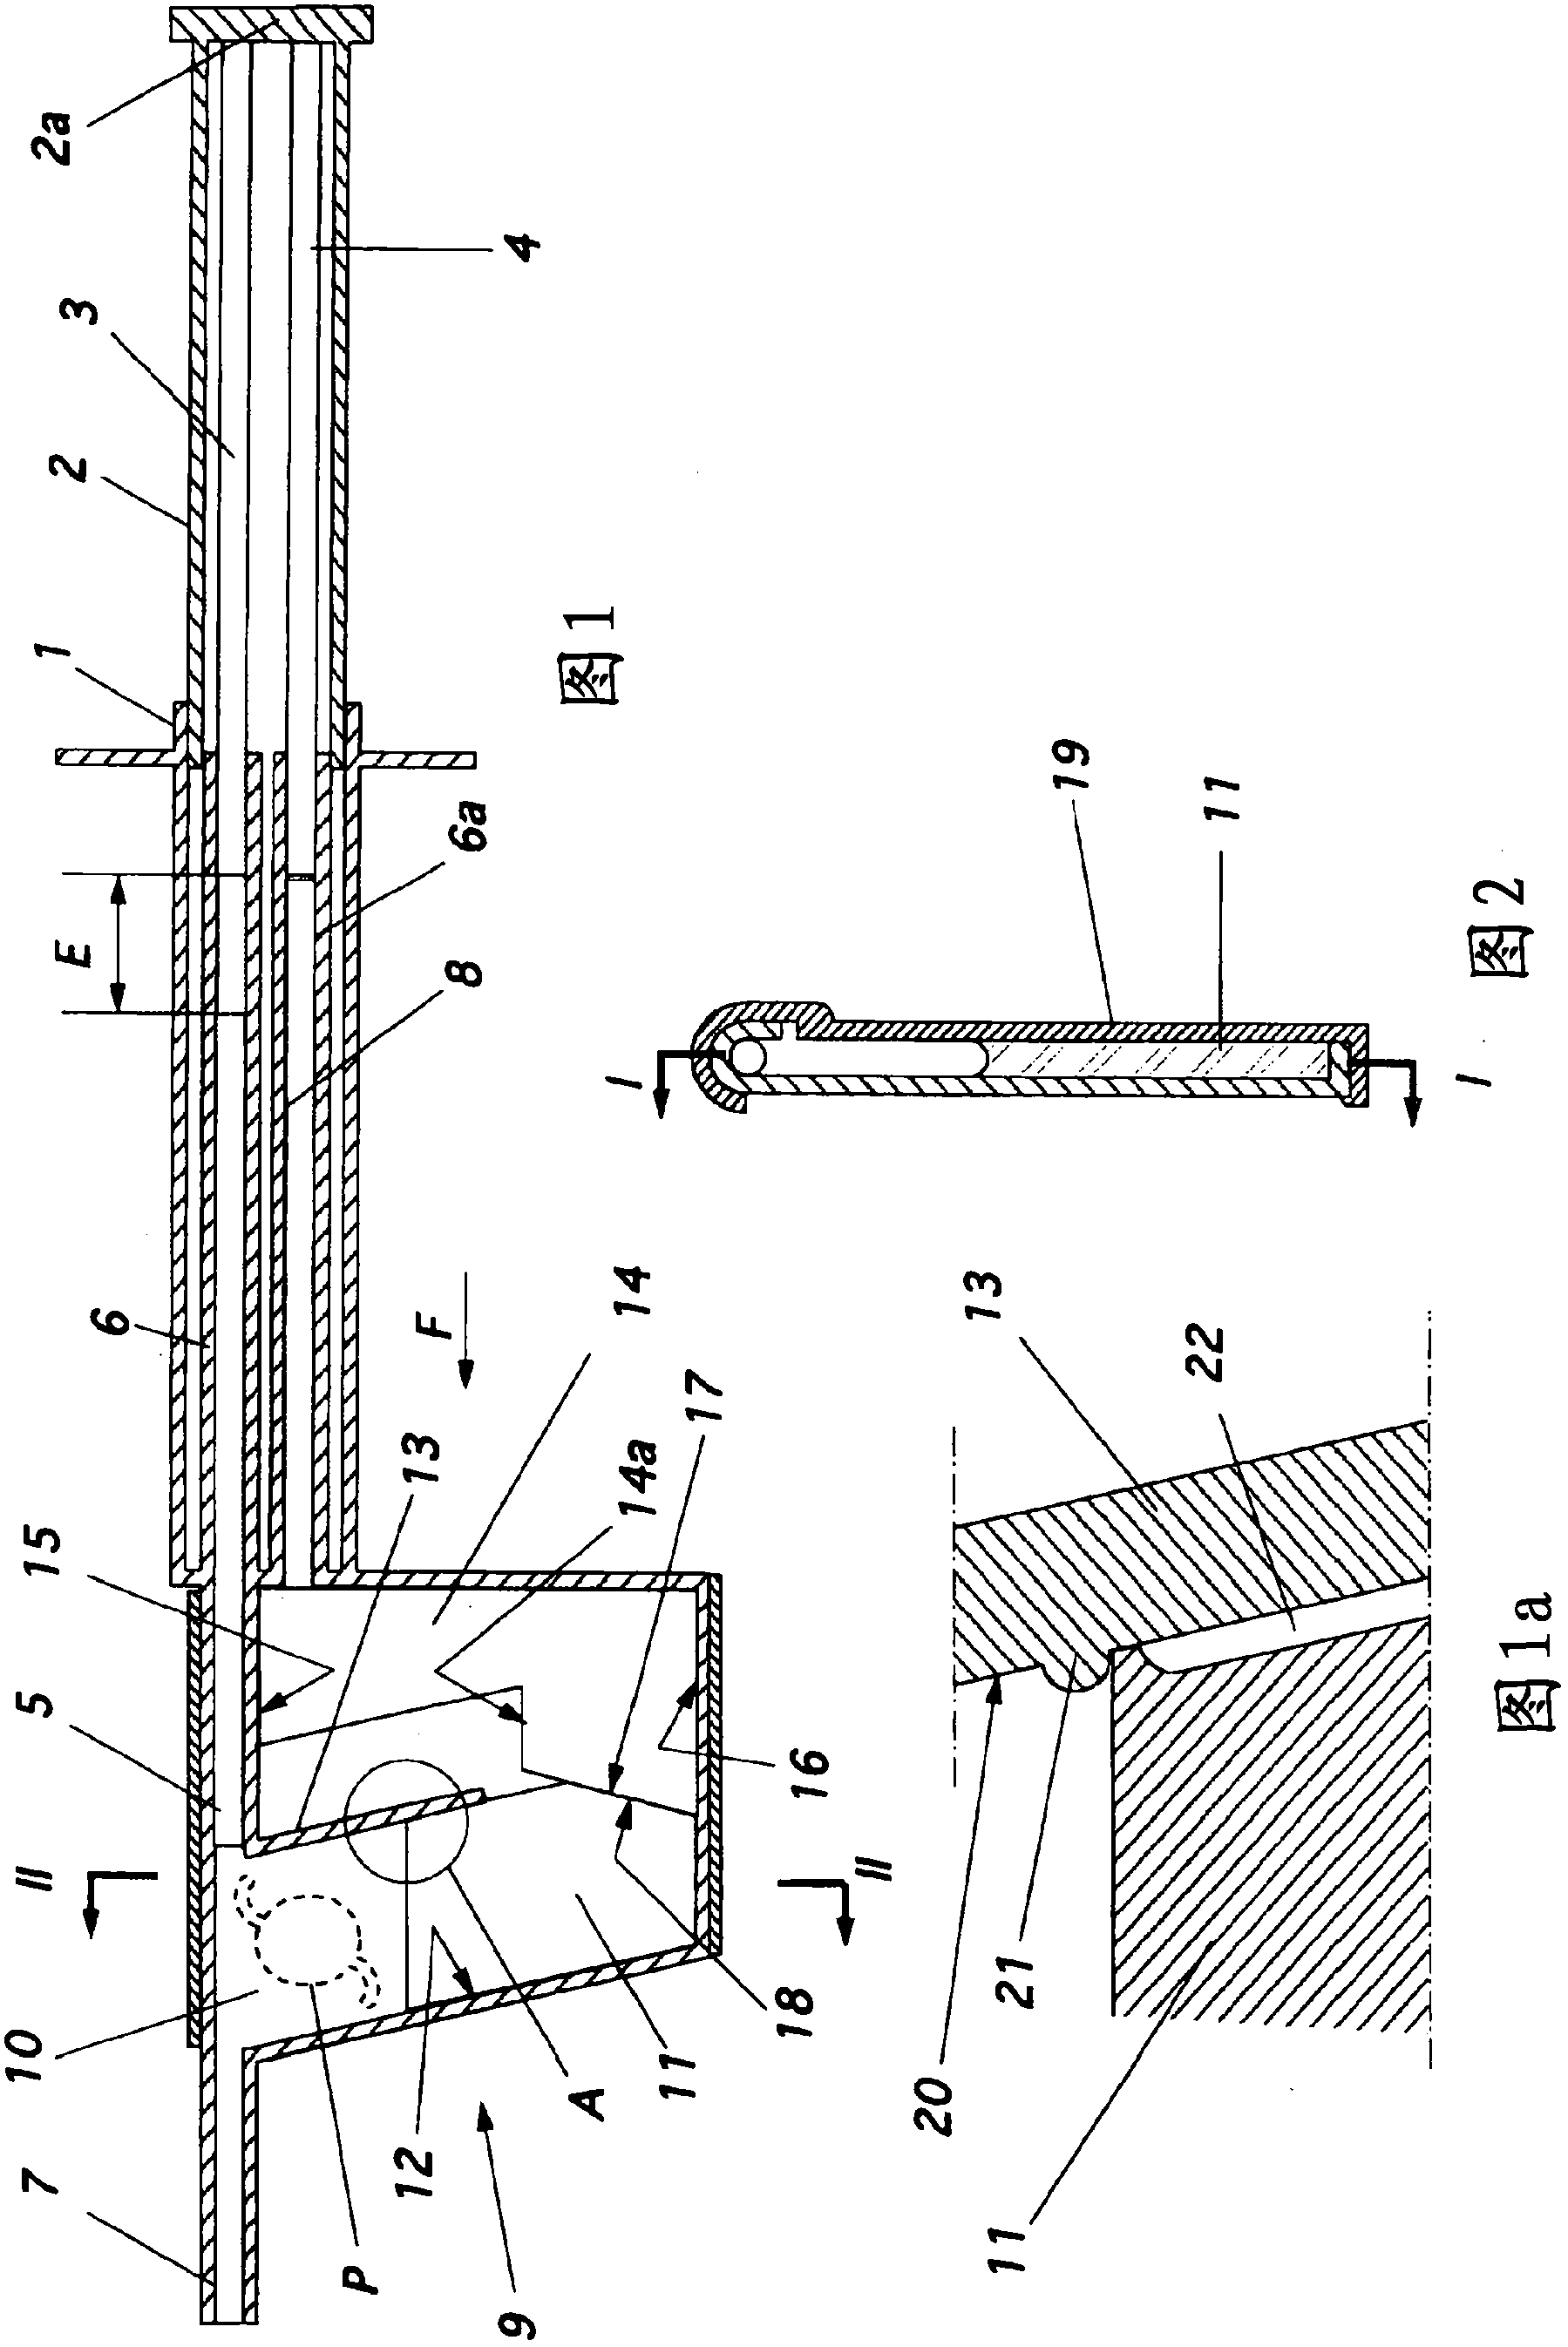 Injector for a flexible ophthalmologic implant